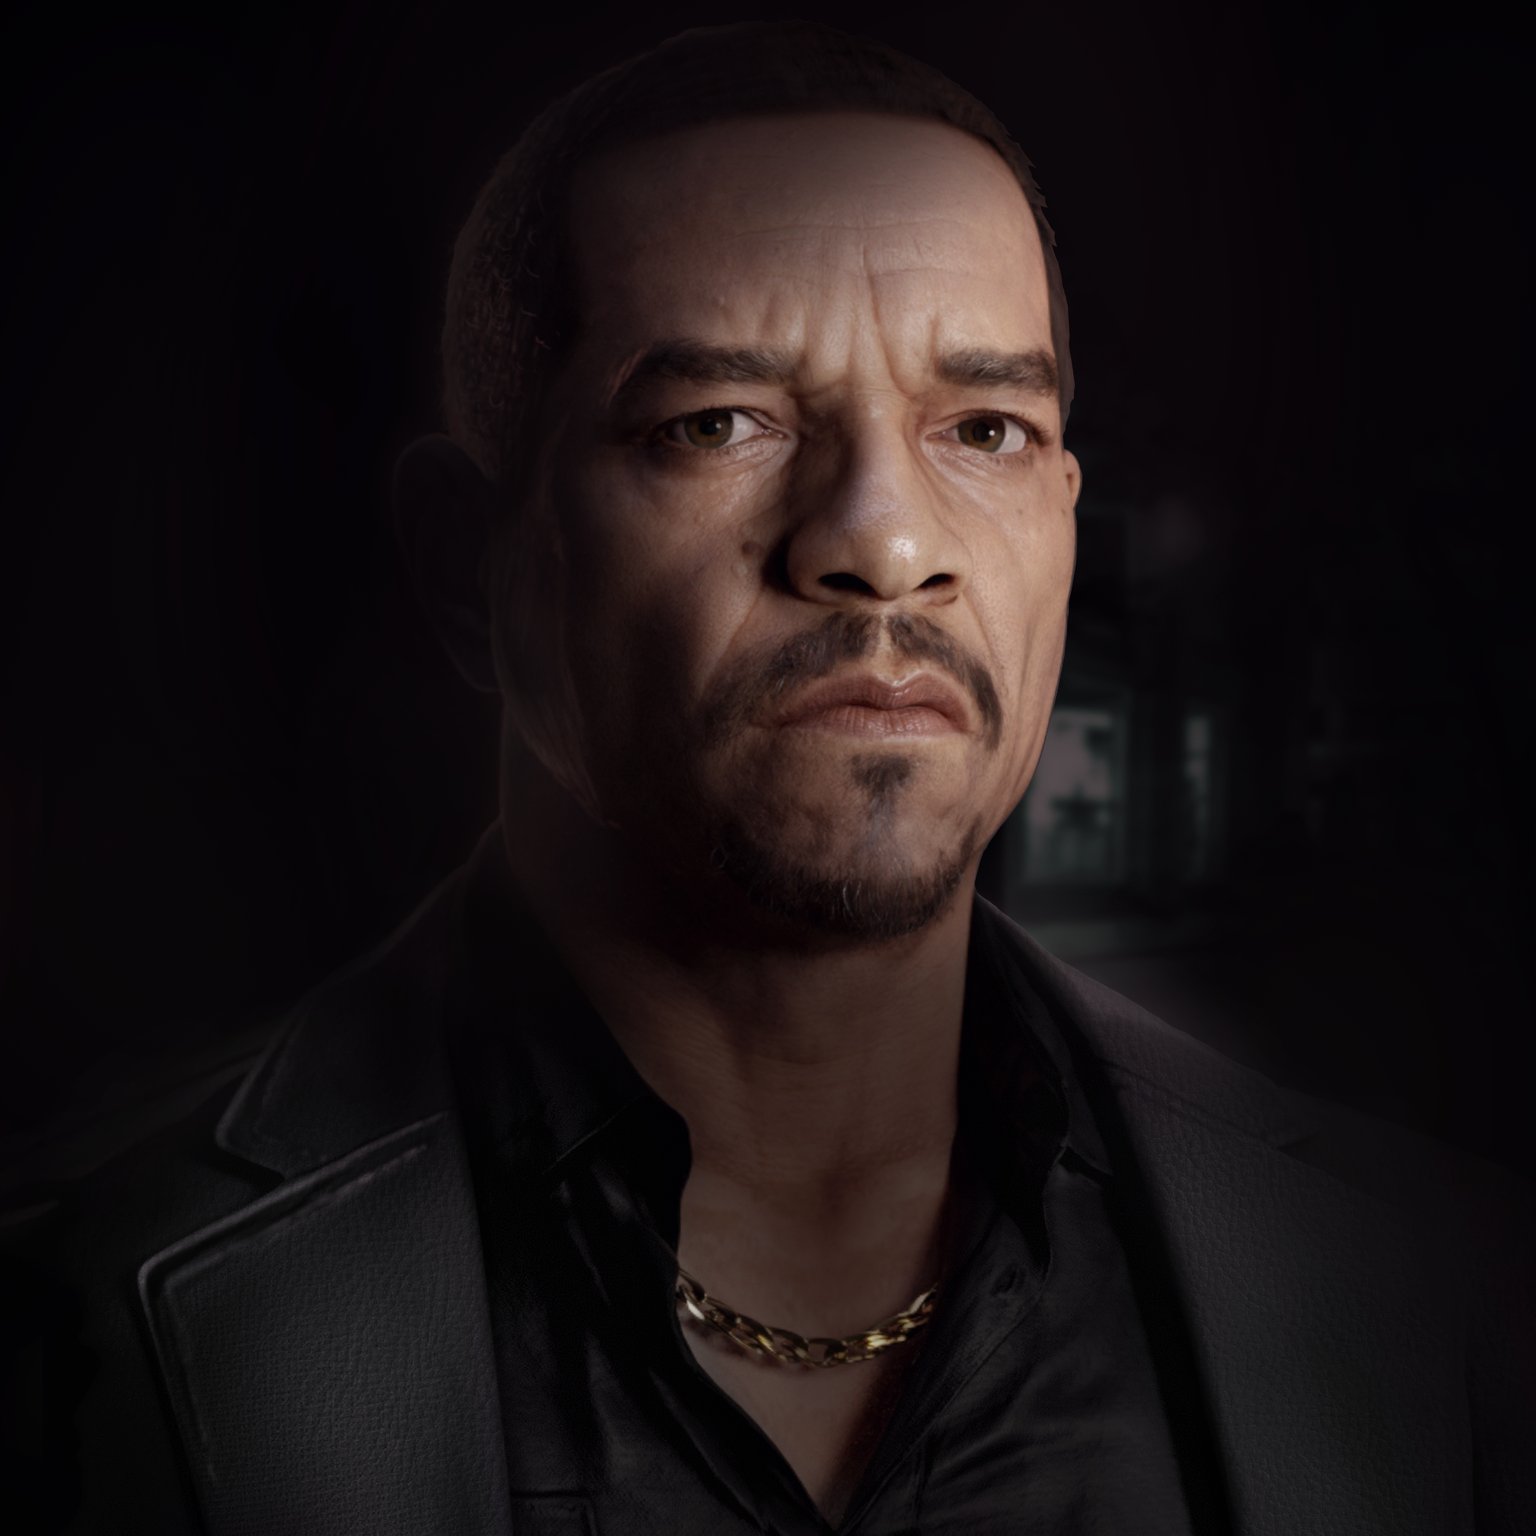 Payday 3, Ice-T